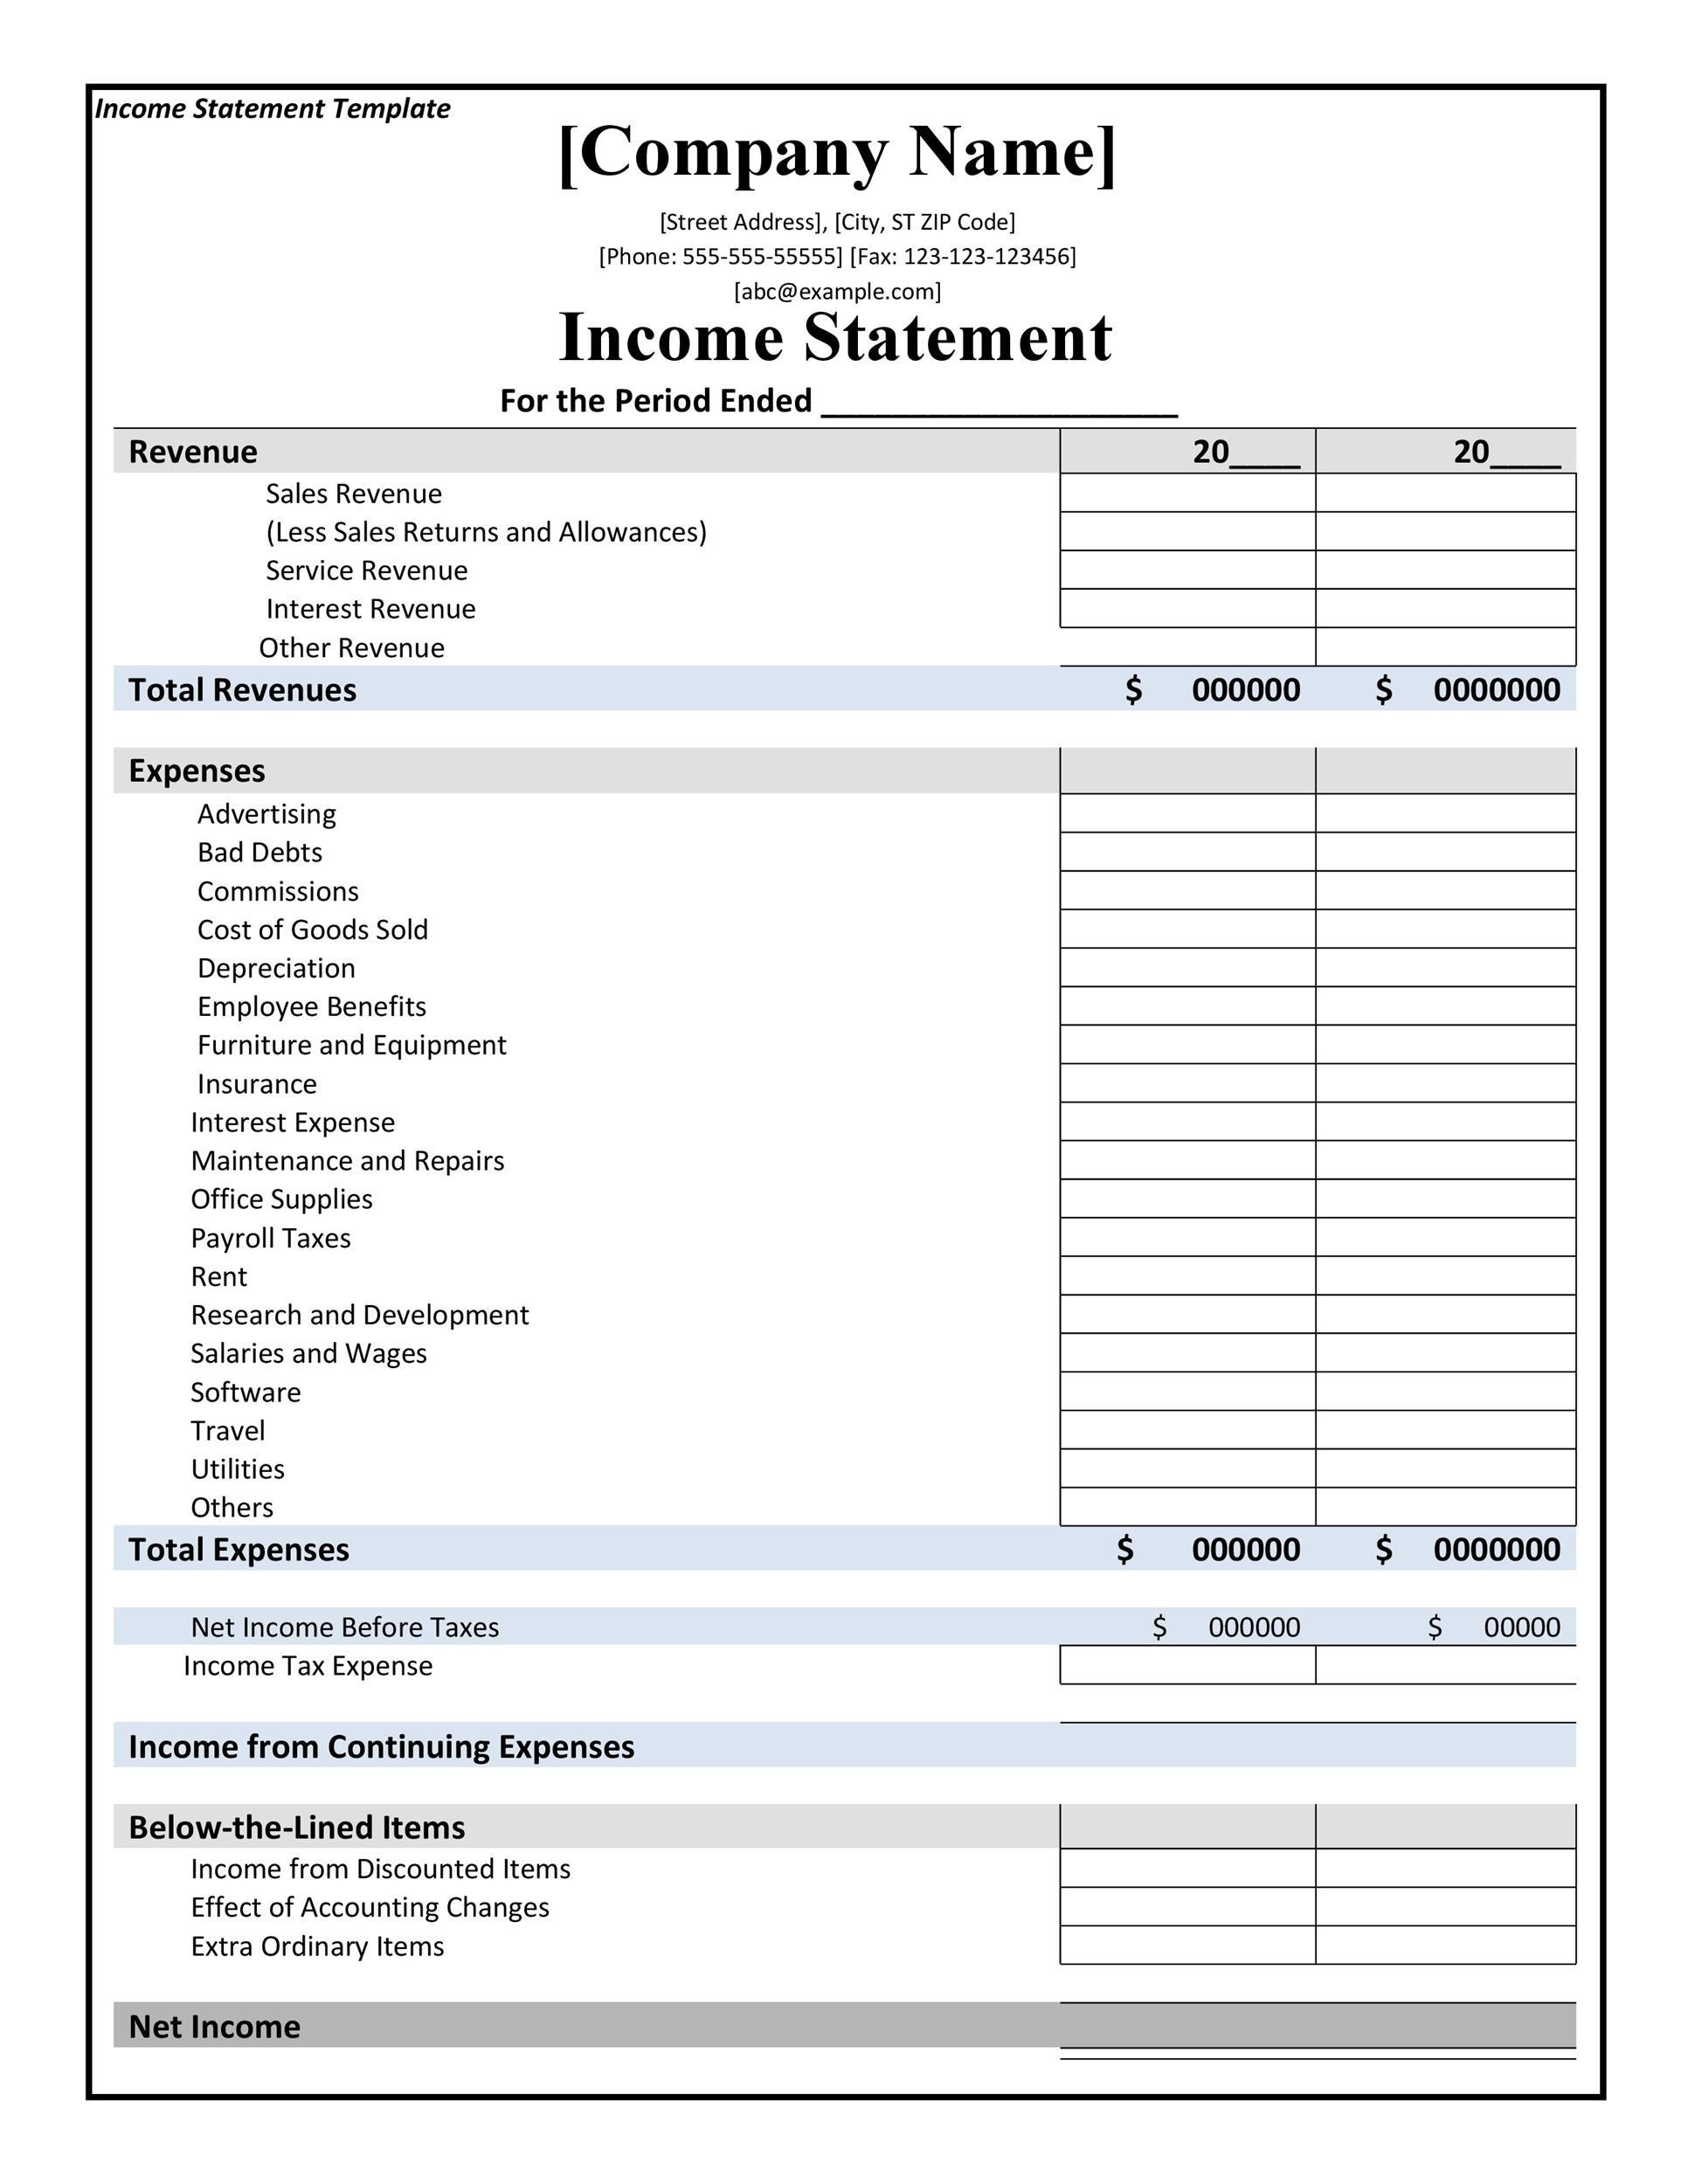 41 FREE Income Statement Templates Examples TemplateLab